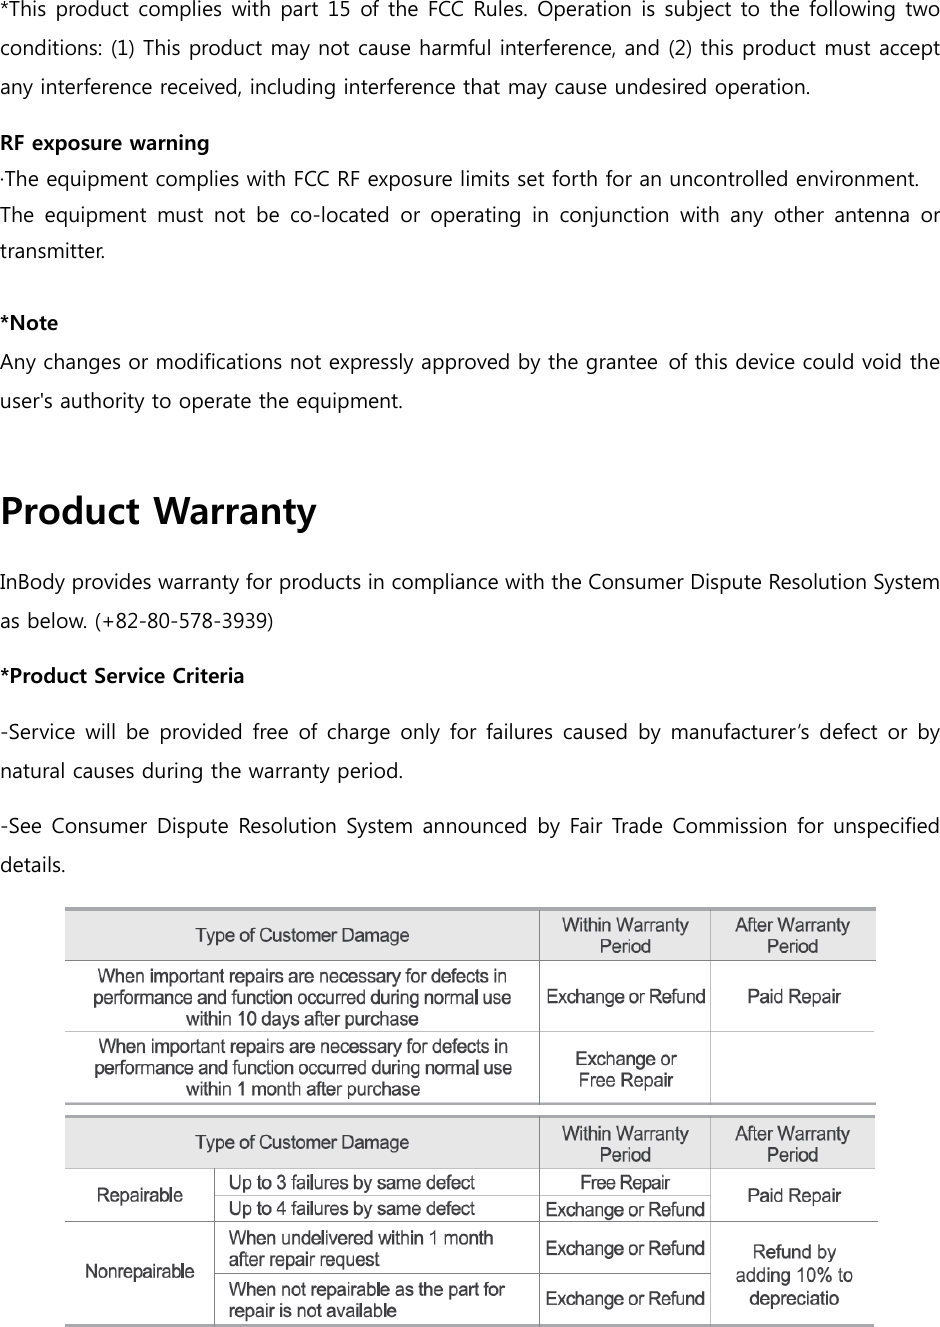 *This product complies with part 15 of the FCC Rules. Operation is subject to the following two conditions: (1) This product may not cause harmful interference, and (2) this product must accept any interference received, including interference that may cause undesired operation. RF exposure warning ·The equipment complies with FCC RF exposure limits set forth for an uncontrolled environment. The  equipment  must  not  be  co-located  or  operating  in  conjunction with any other antenna or transmitter.  *Note Any changes or modifications not expressly approved by the grantee  of this device could void the user&apos;s authority to operate the equipment.  Product Warranty InBody provides warranty for products in compliance with the Consumer Dispute Resolution System as below. (+82-80-578-3939) *Product Service Criteria -Service  will  be provided free of charge only for failures caused by manufacturer’s defect  or by natural causes during the warranty period.  -See Consumer Dispute Resolution System announced by Fair Trade  Commission for unspecified details.     